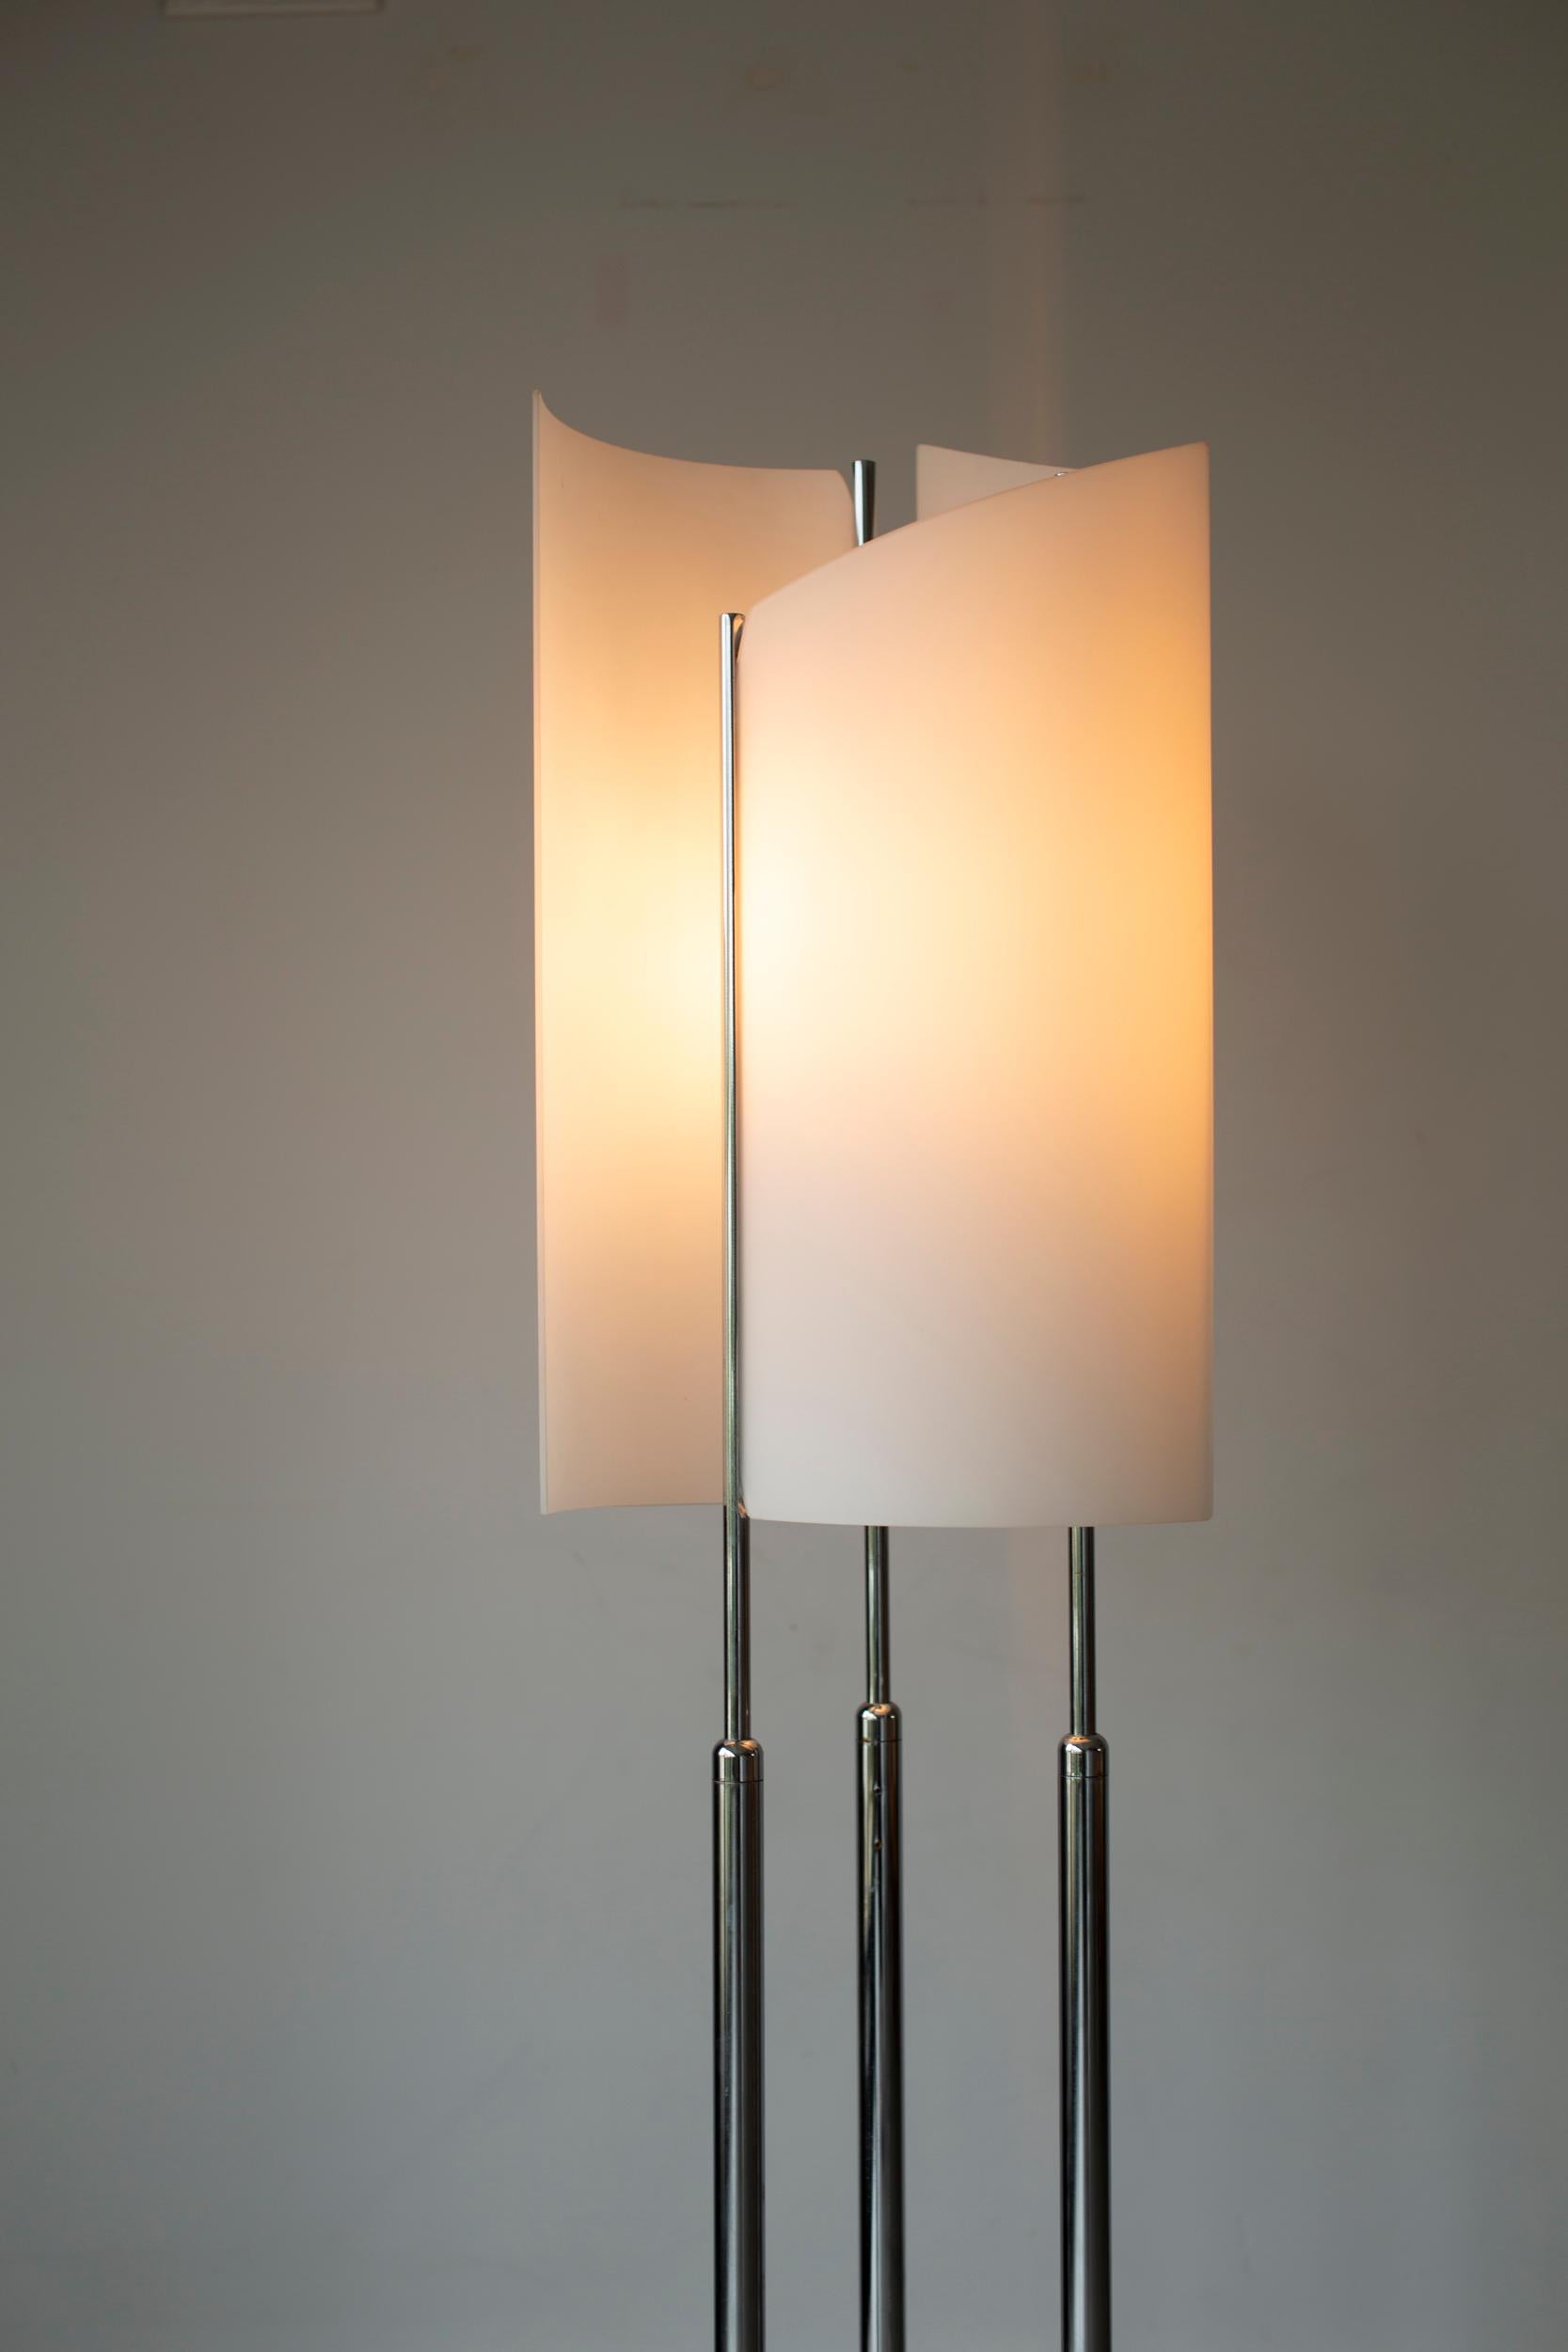 Light up your space with the vintage charm of the Arianna floorlamp by Bruno Gecchelin! This quirky 70's style lamp on a marble foot is sure to add a playful touch to any room. With its unique design and warm glow, it's the perfect addition for